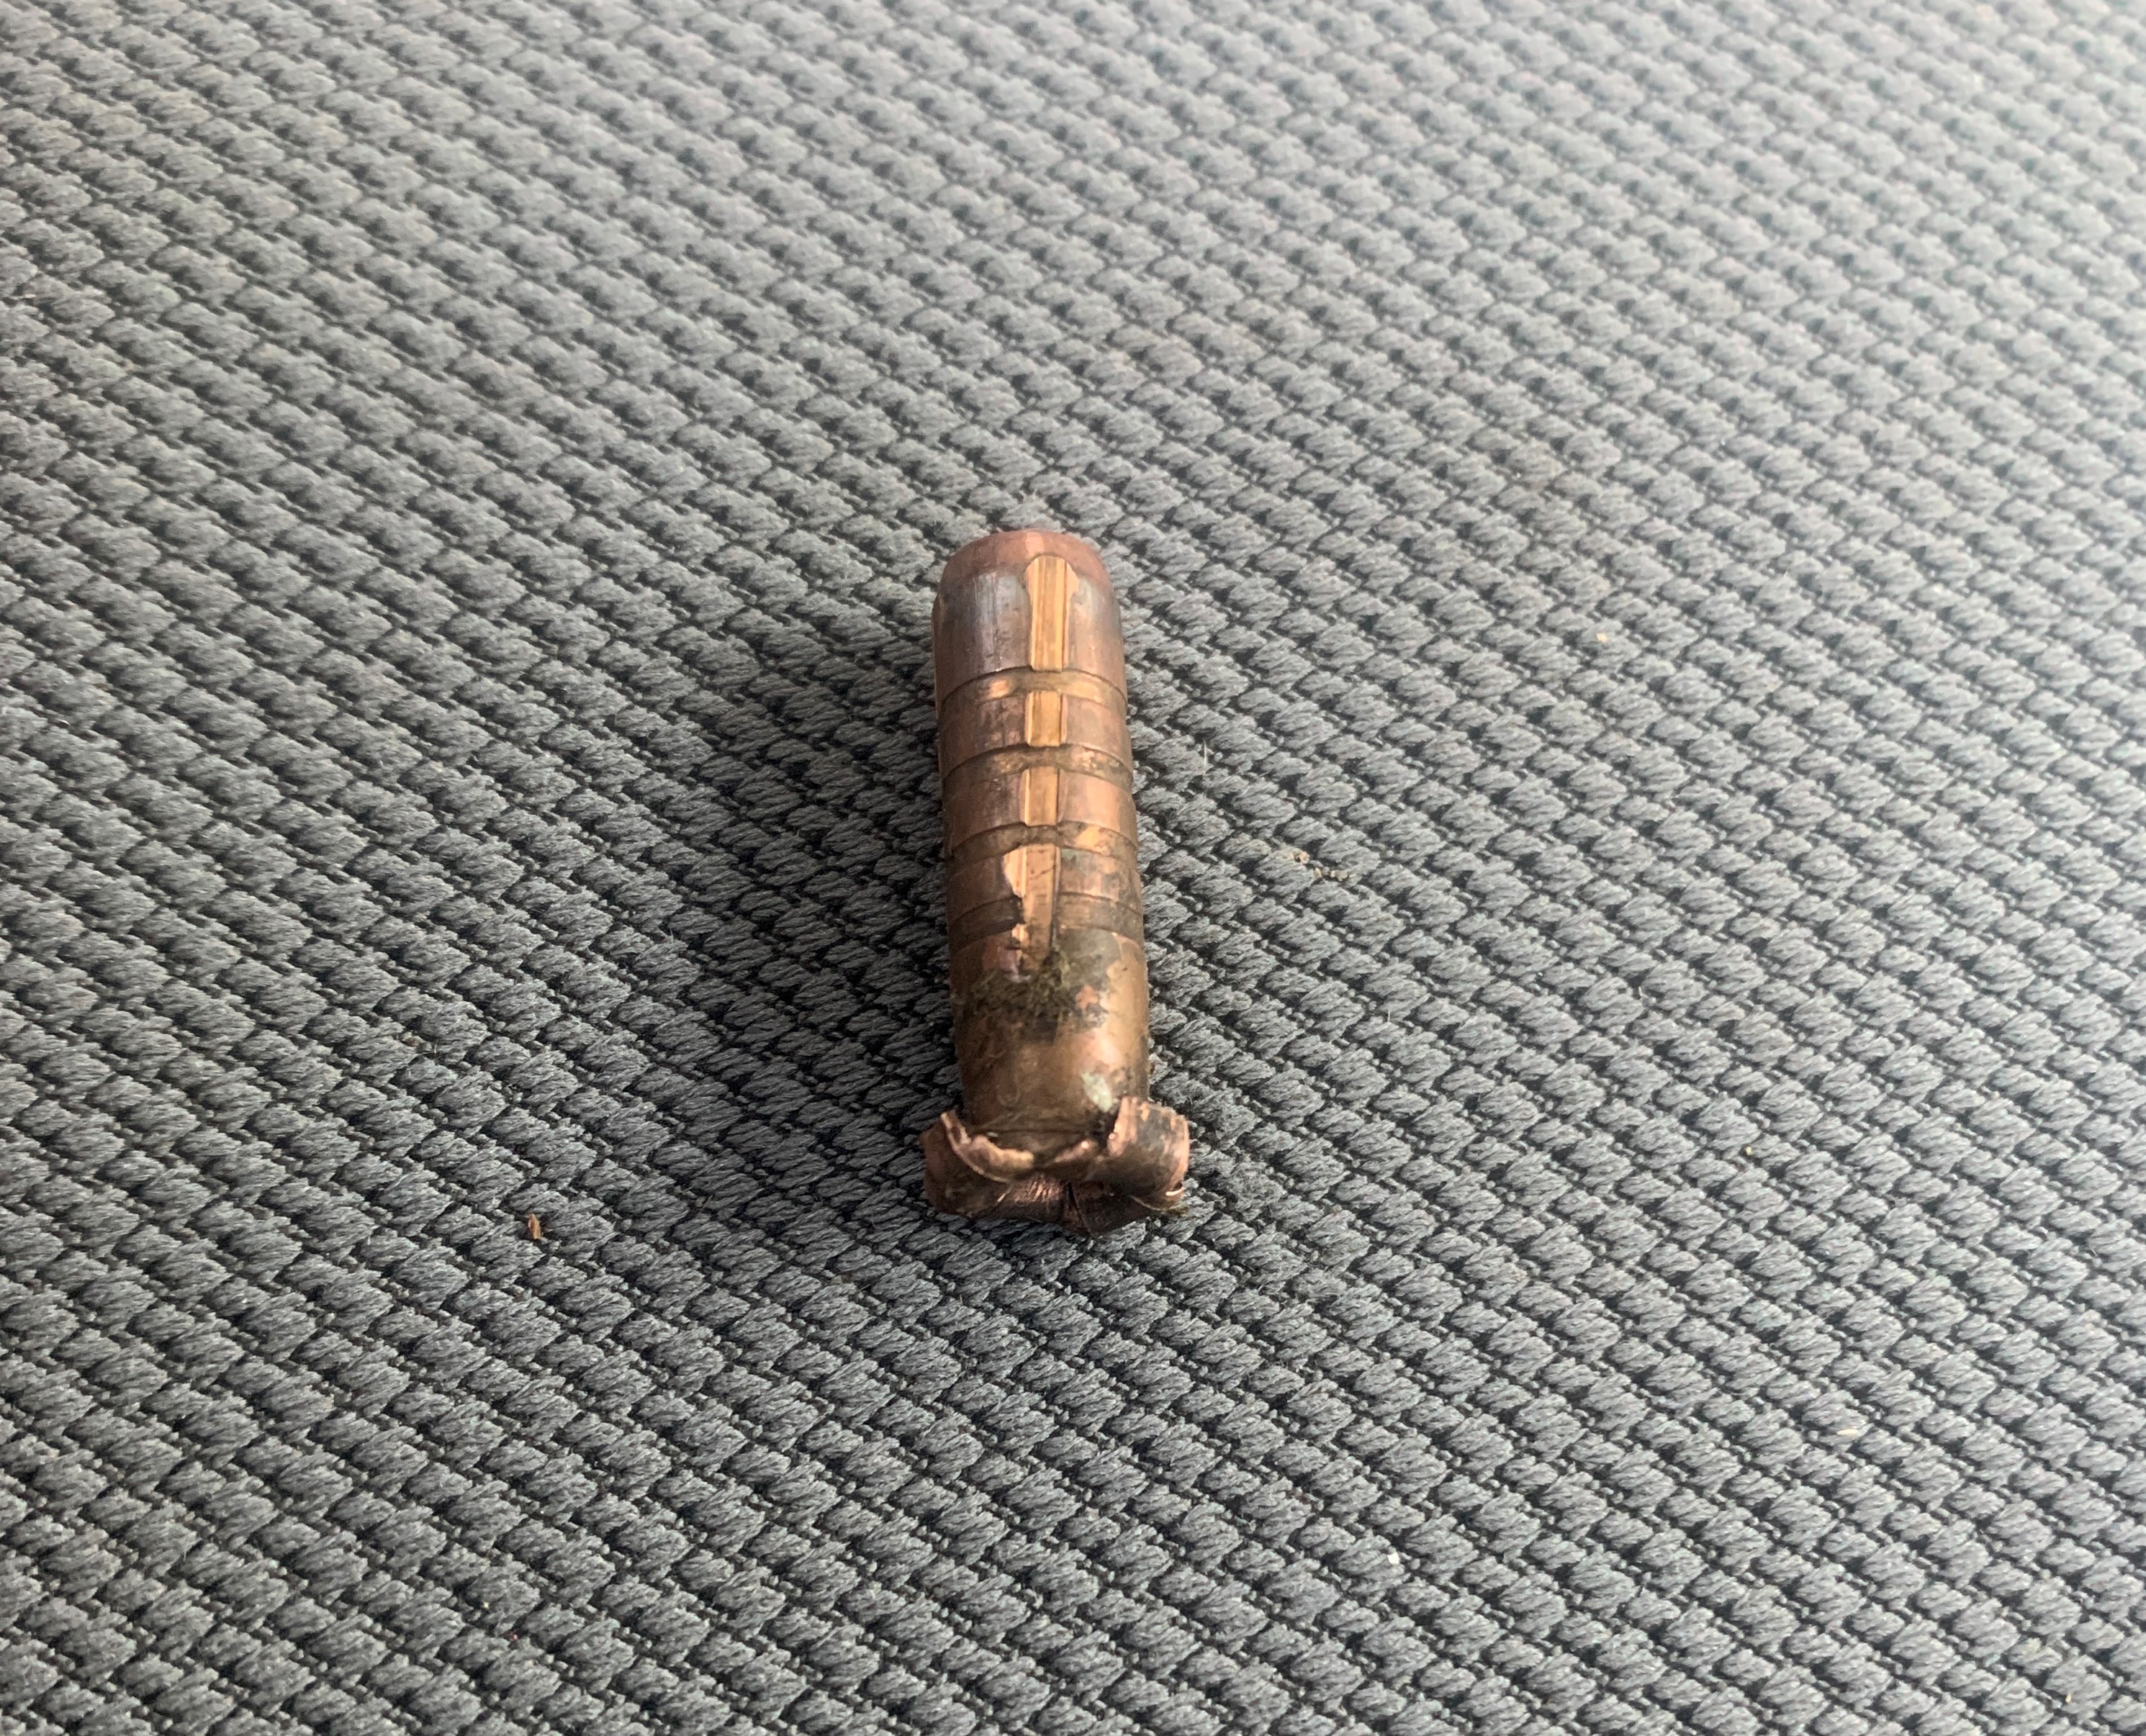 Hollow Point Bullet